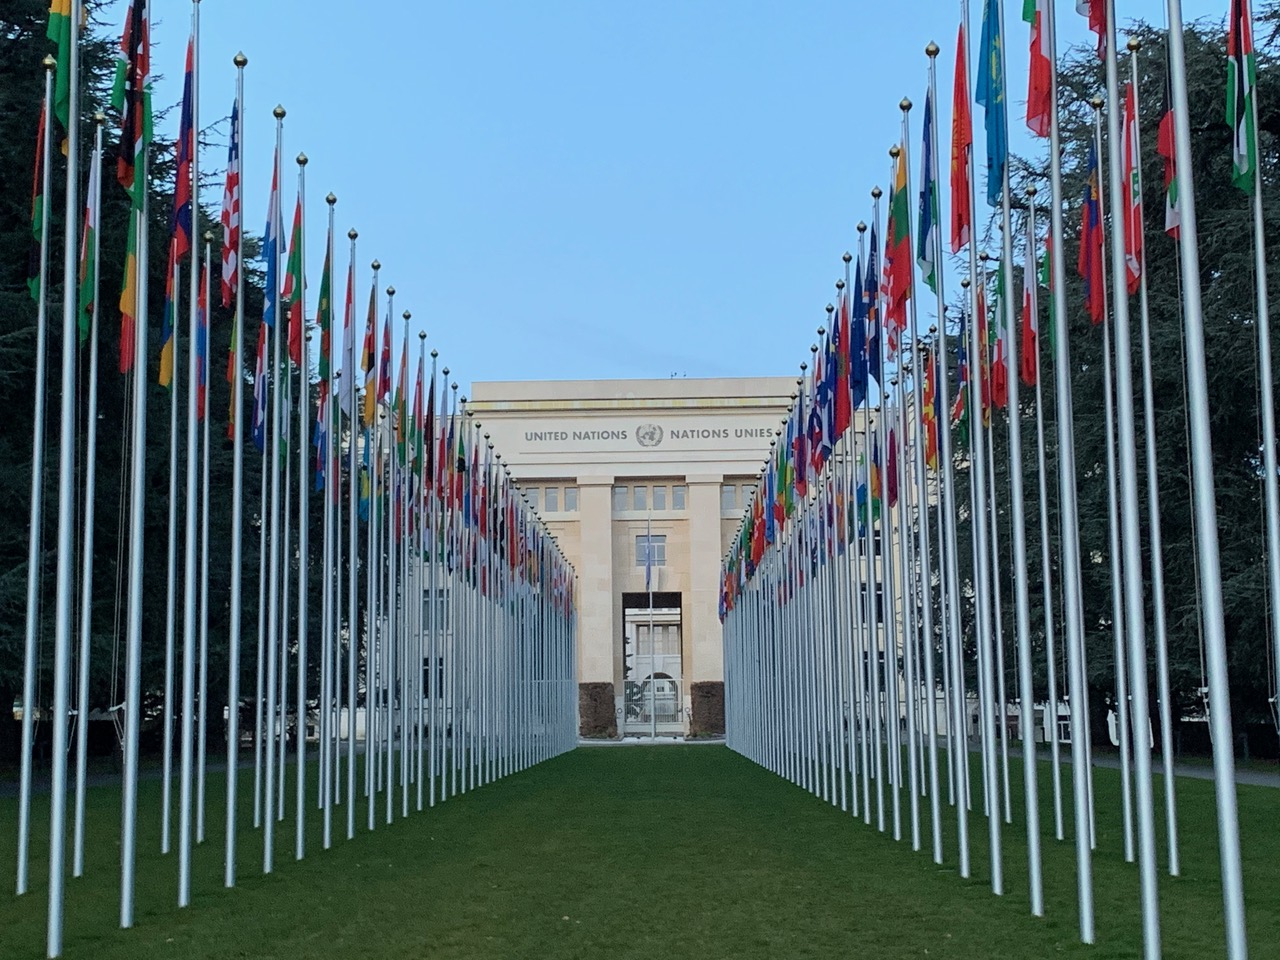 Rows of flags leading to the United Nations buidling